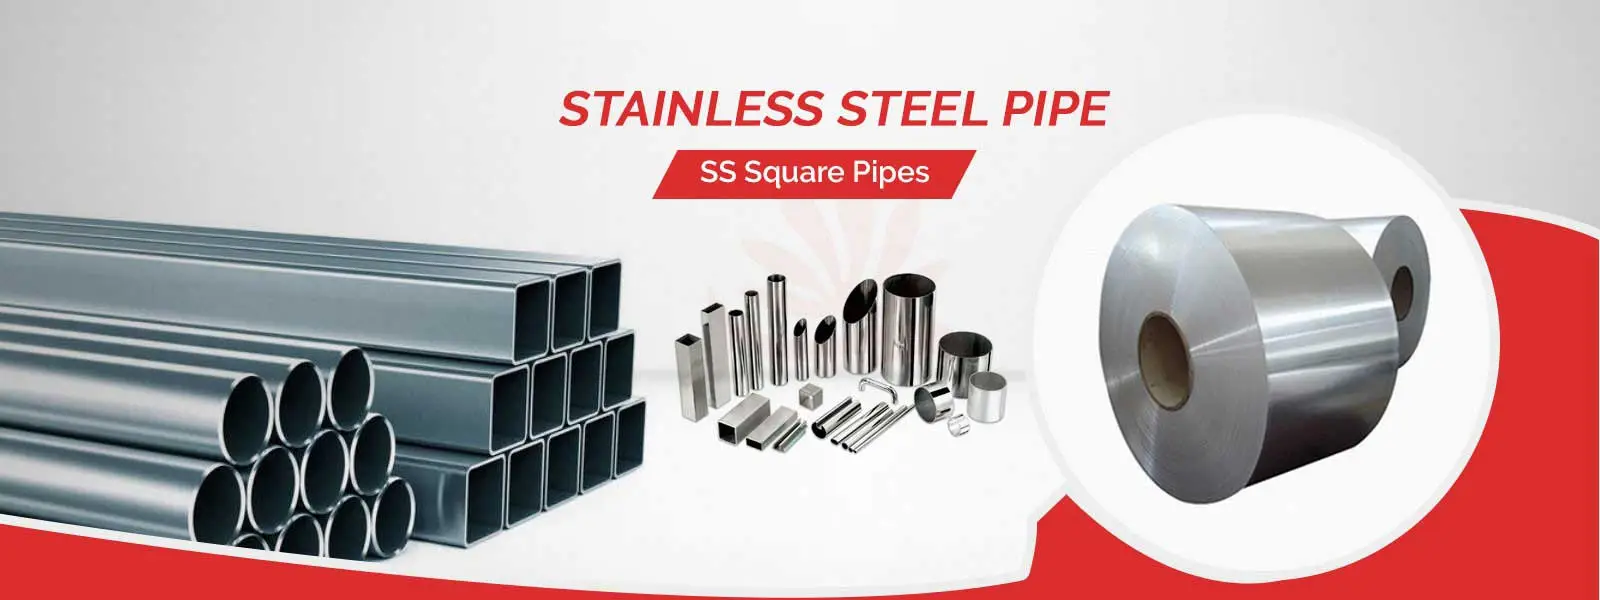 Stainless Steel Pipe Manufacturers in Haryana